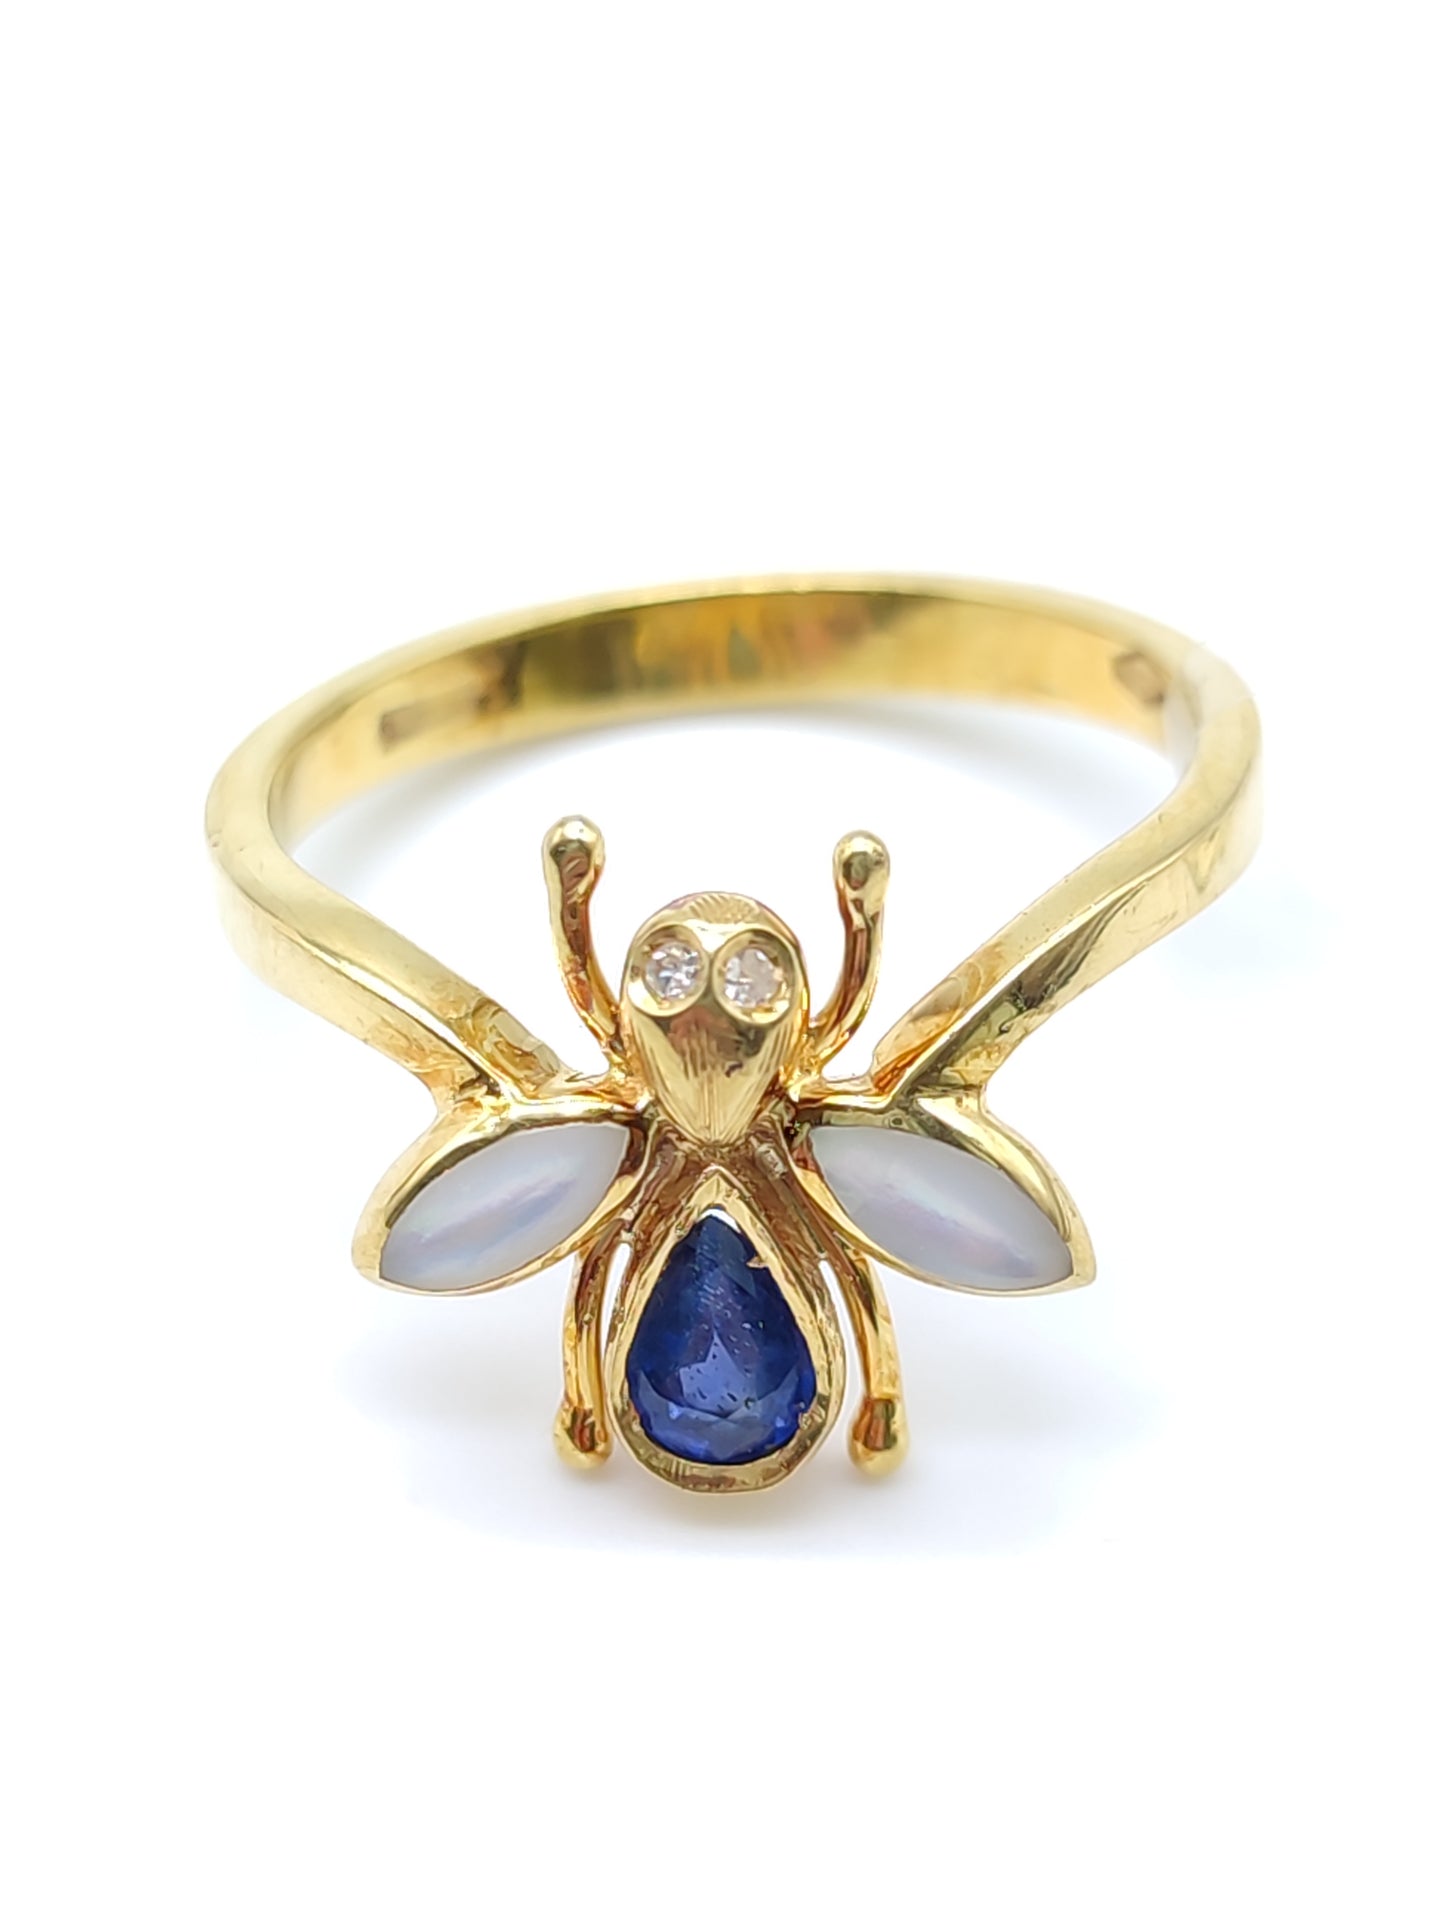 Pavan - Gold ring with sapphire, mother of pearl and diamonds